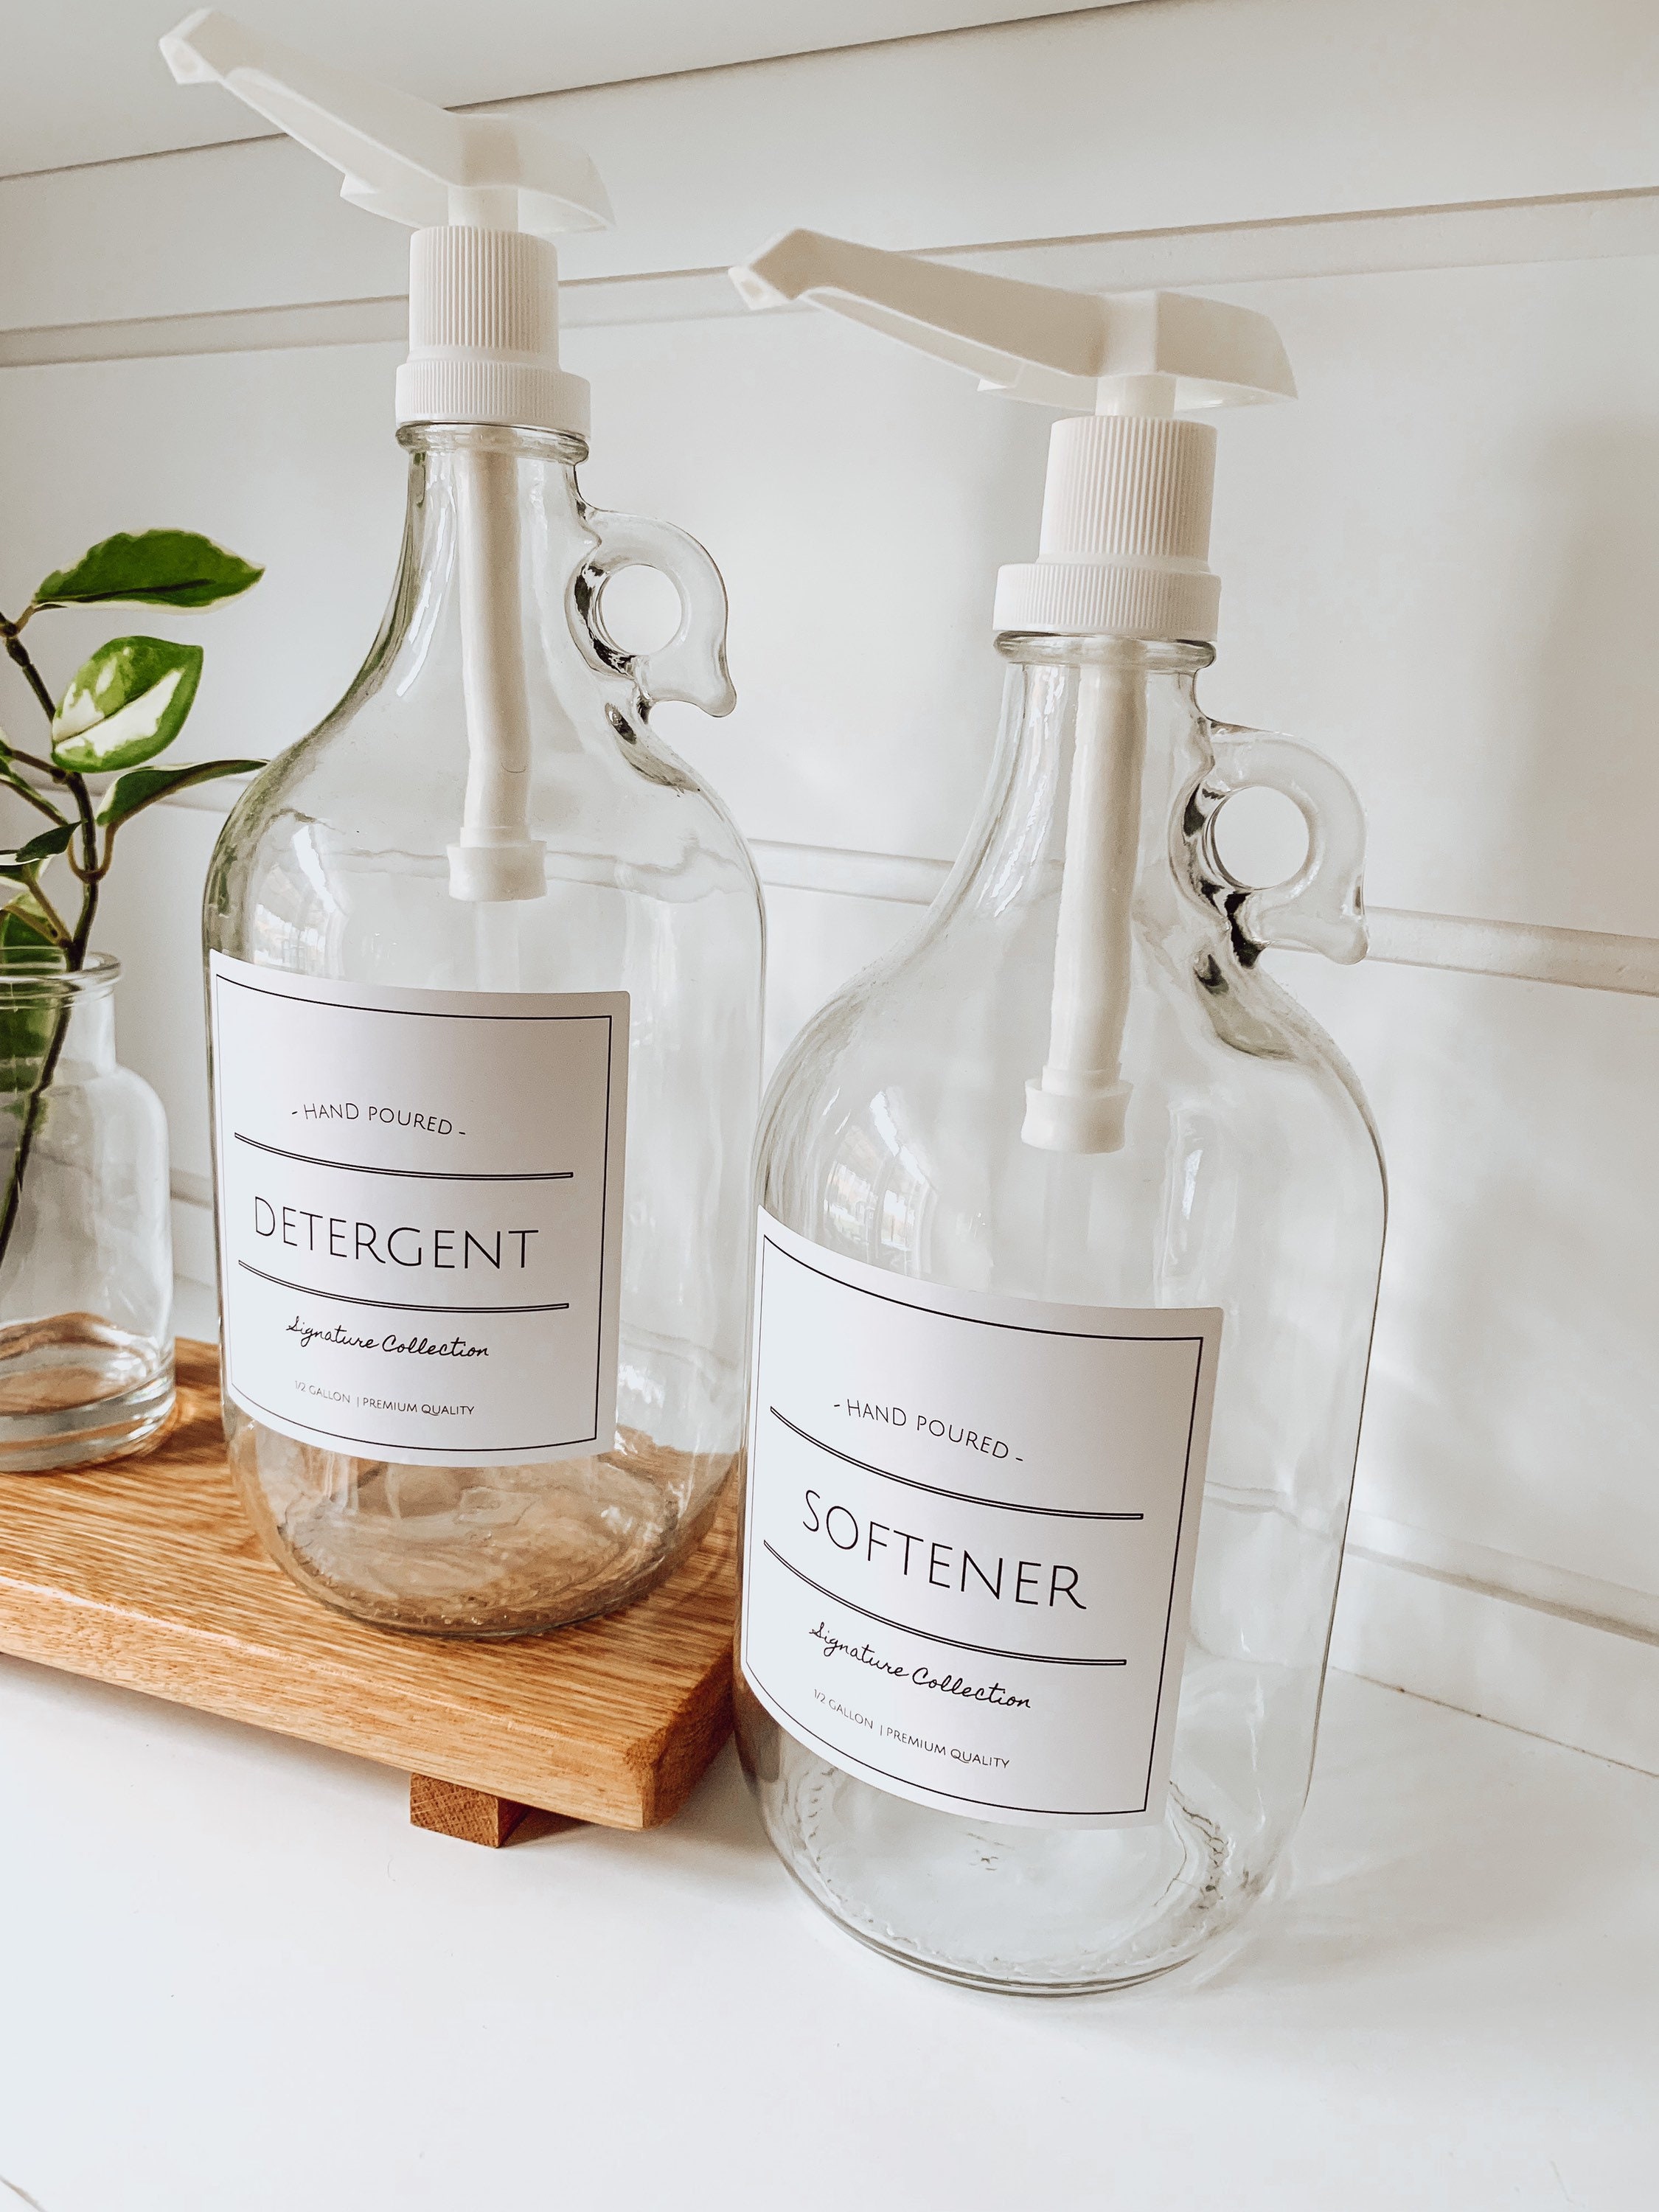 Refillable Bottles with Labels Laundry Collection Eco-Friendly Bleach 12 Gallon Clear Glass Jug